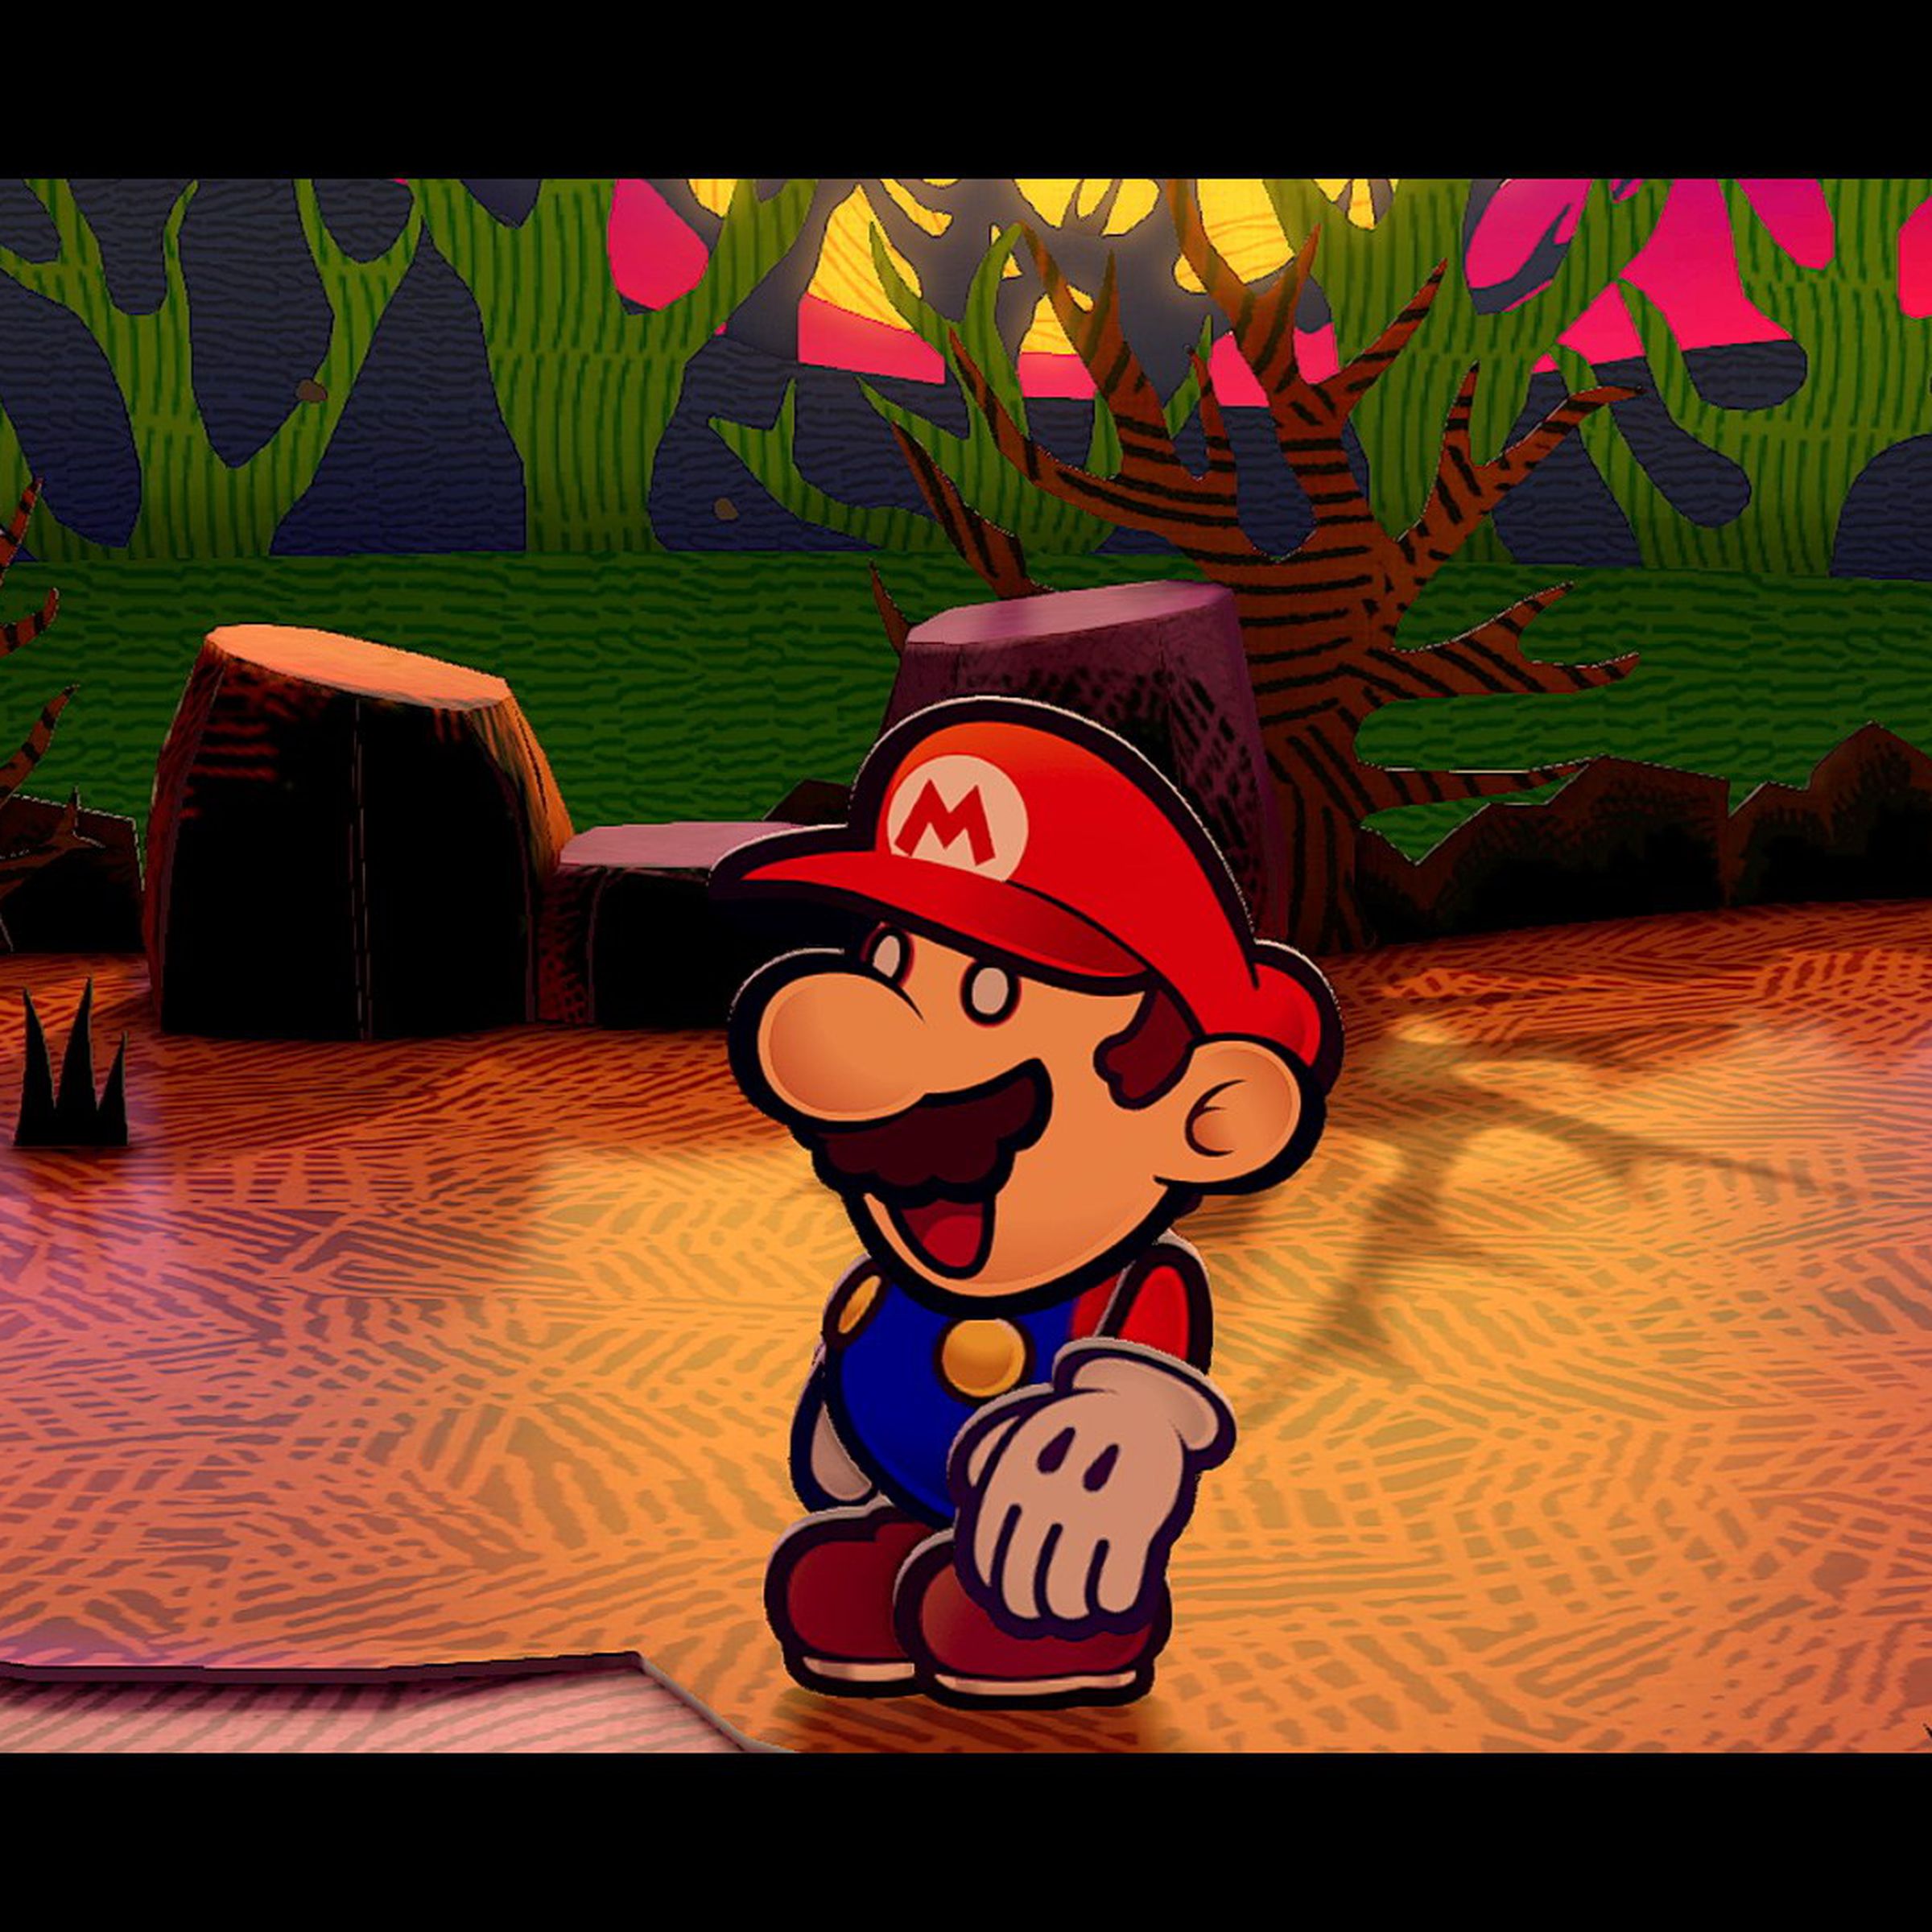 A screenshot from Paper Mario: The Thousand-year Door.